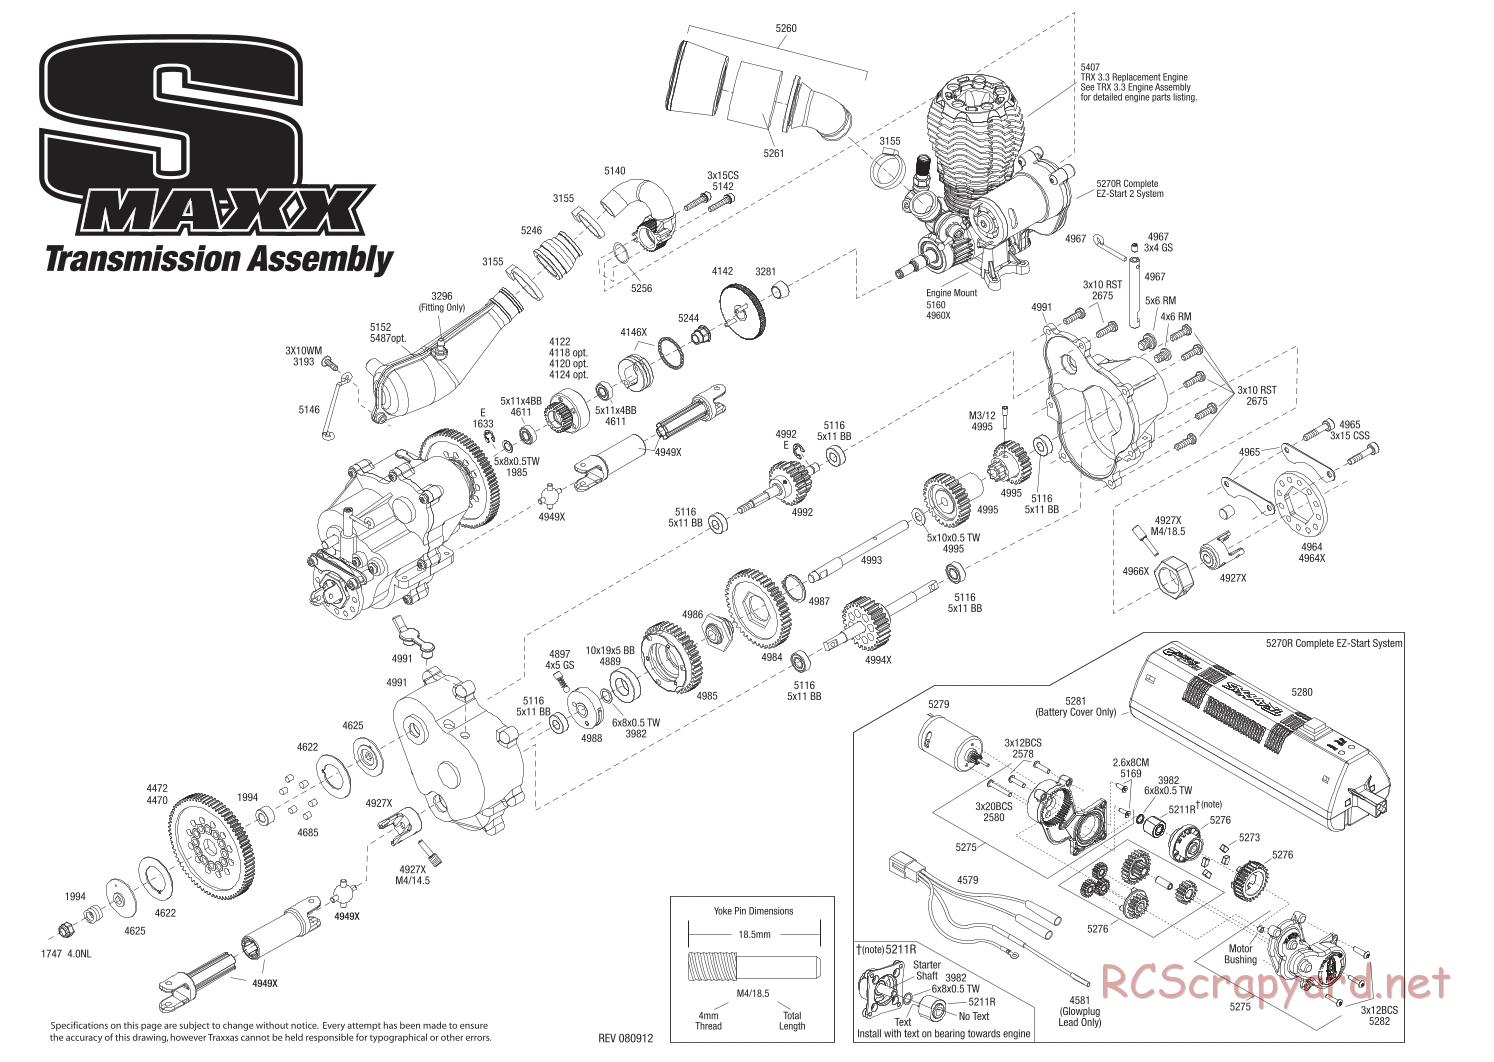 Traxxas - S-Maxx 3.3 (2009) - Exploded Views - Page 4